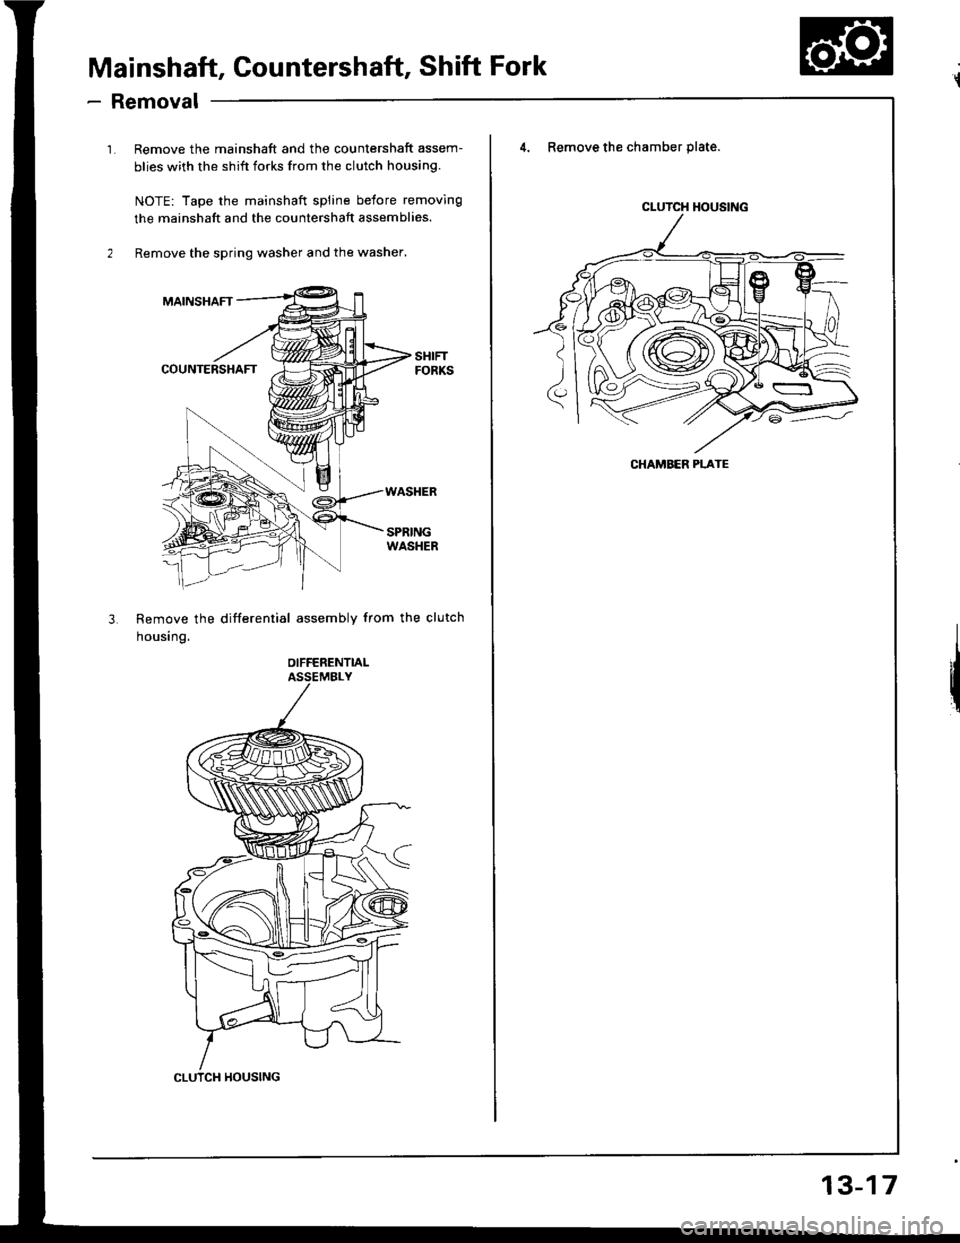 HONDA INTEGRA 1994 4.G Workshop Manual Mainshaft, Gountershaft, Shift Fork
- Removal
1. Remove the mainshaft and the countershaft assem-
blies with the shift forks from the clutch housing.
NOTE: Tape the mainshaft spline belore removing
th